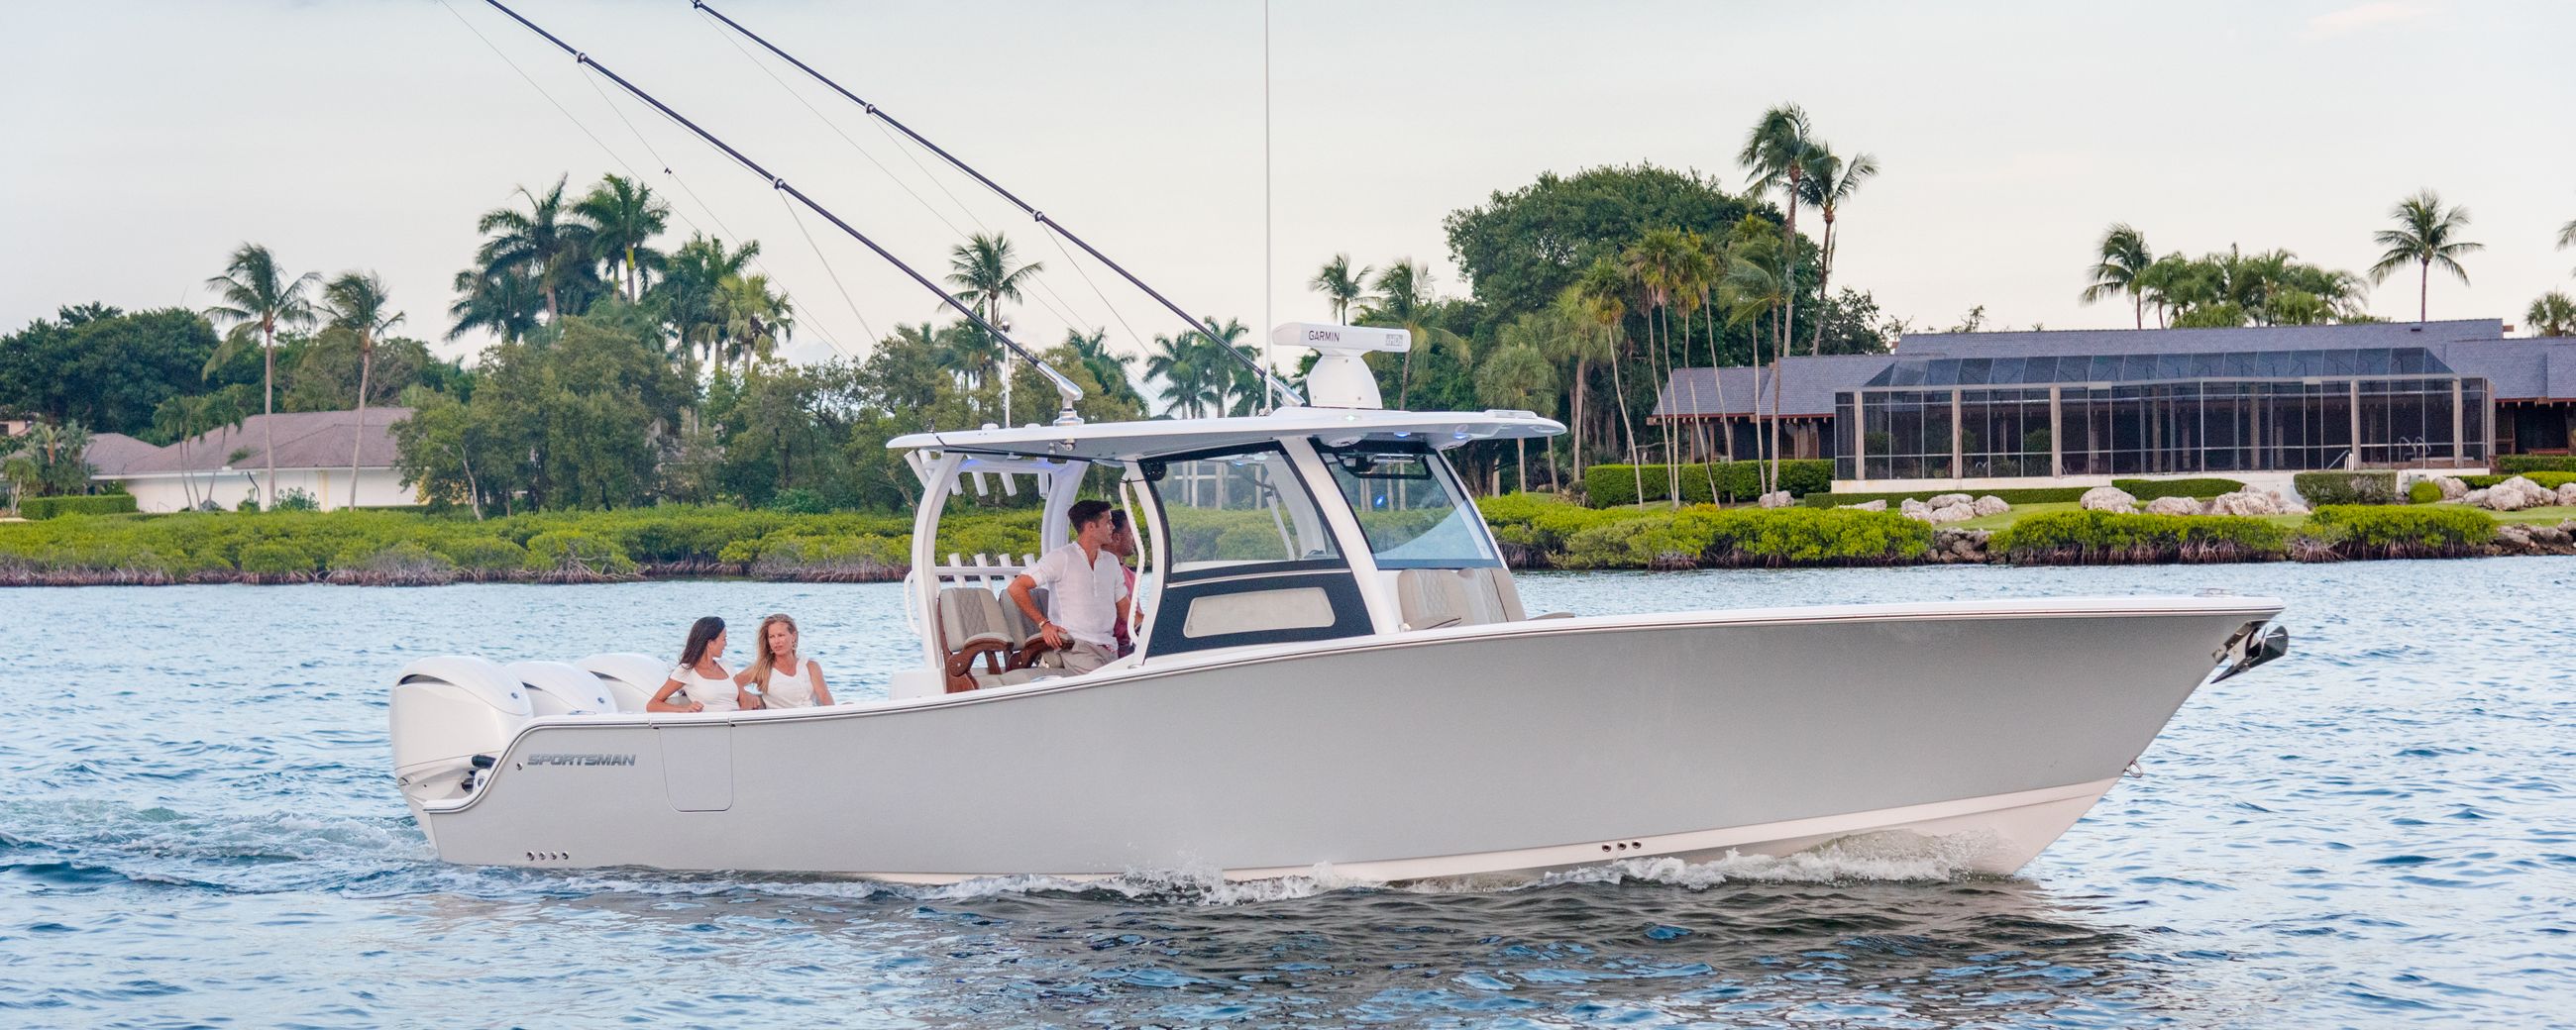 The all-new Open 352 Center Console running on the water with a family on board